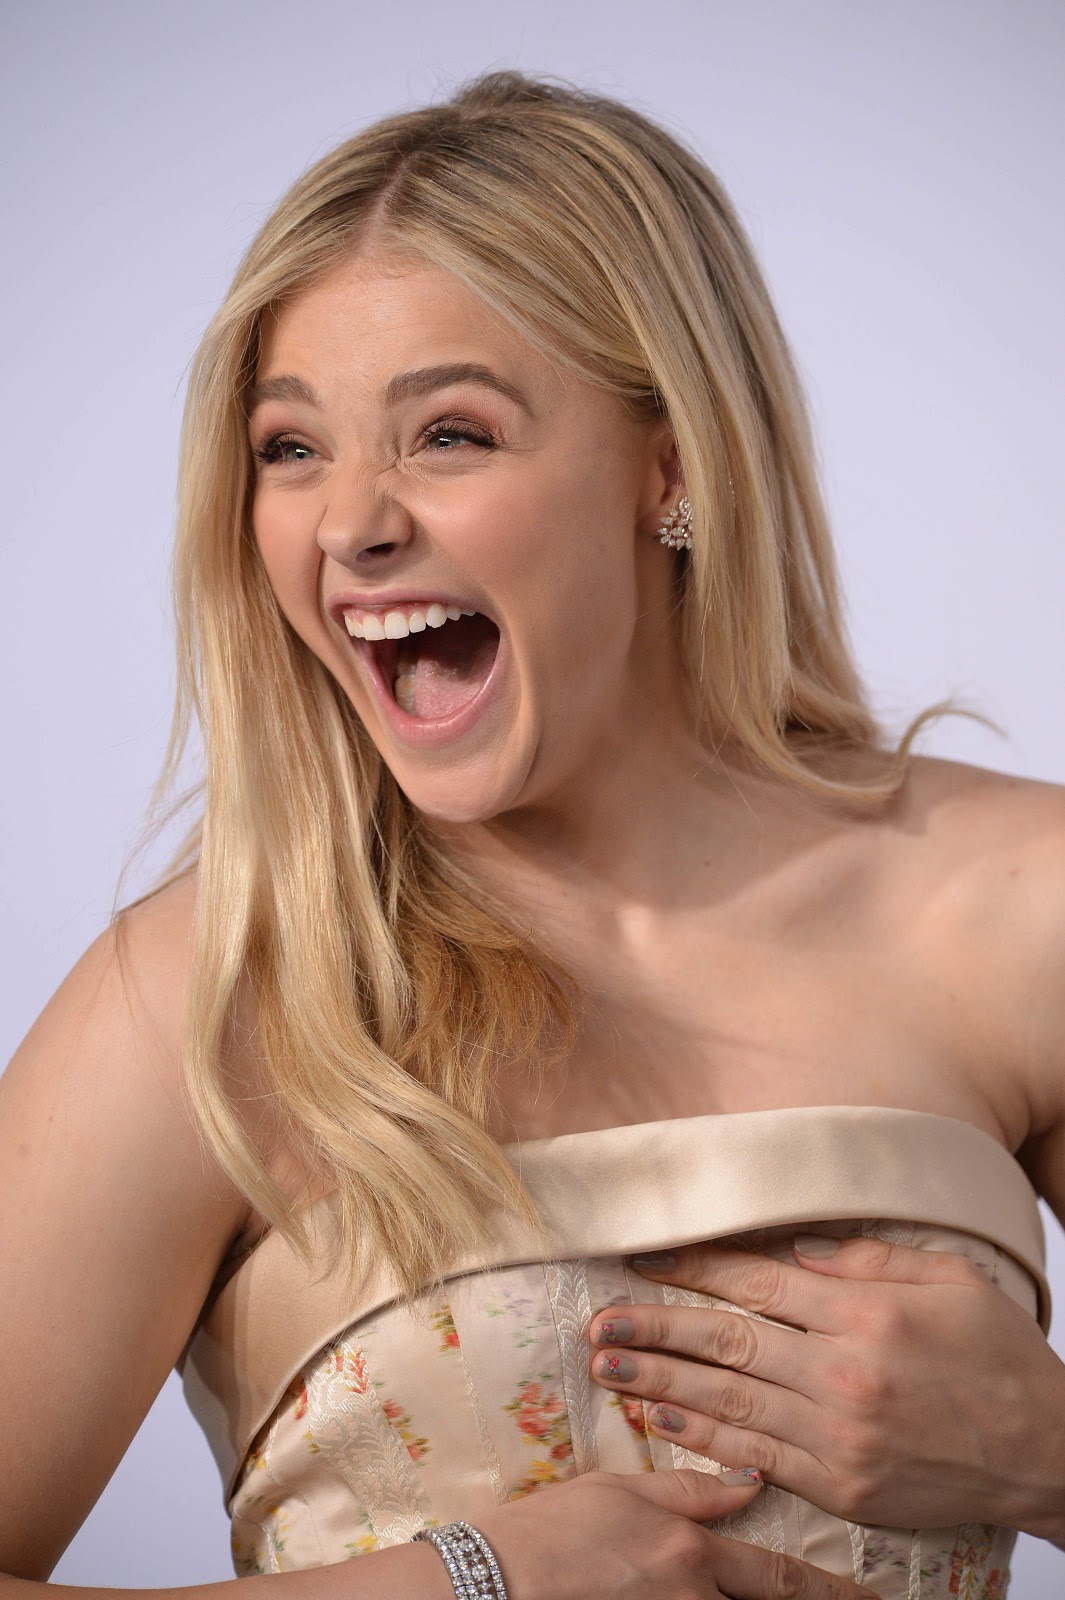 Get All The Details About Chloe Grace Moretz Age, Her Relationship